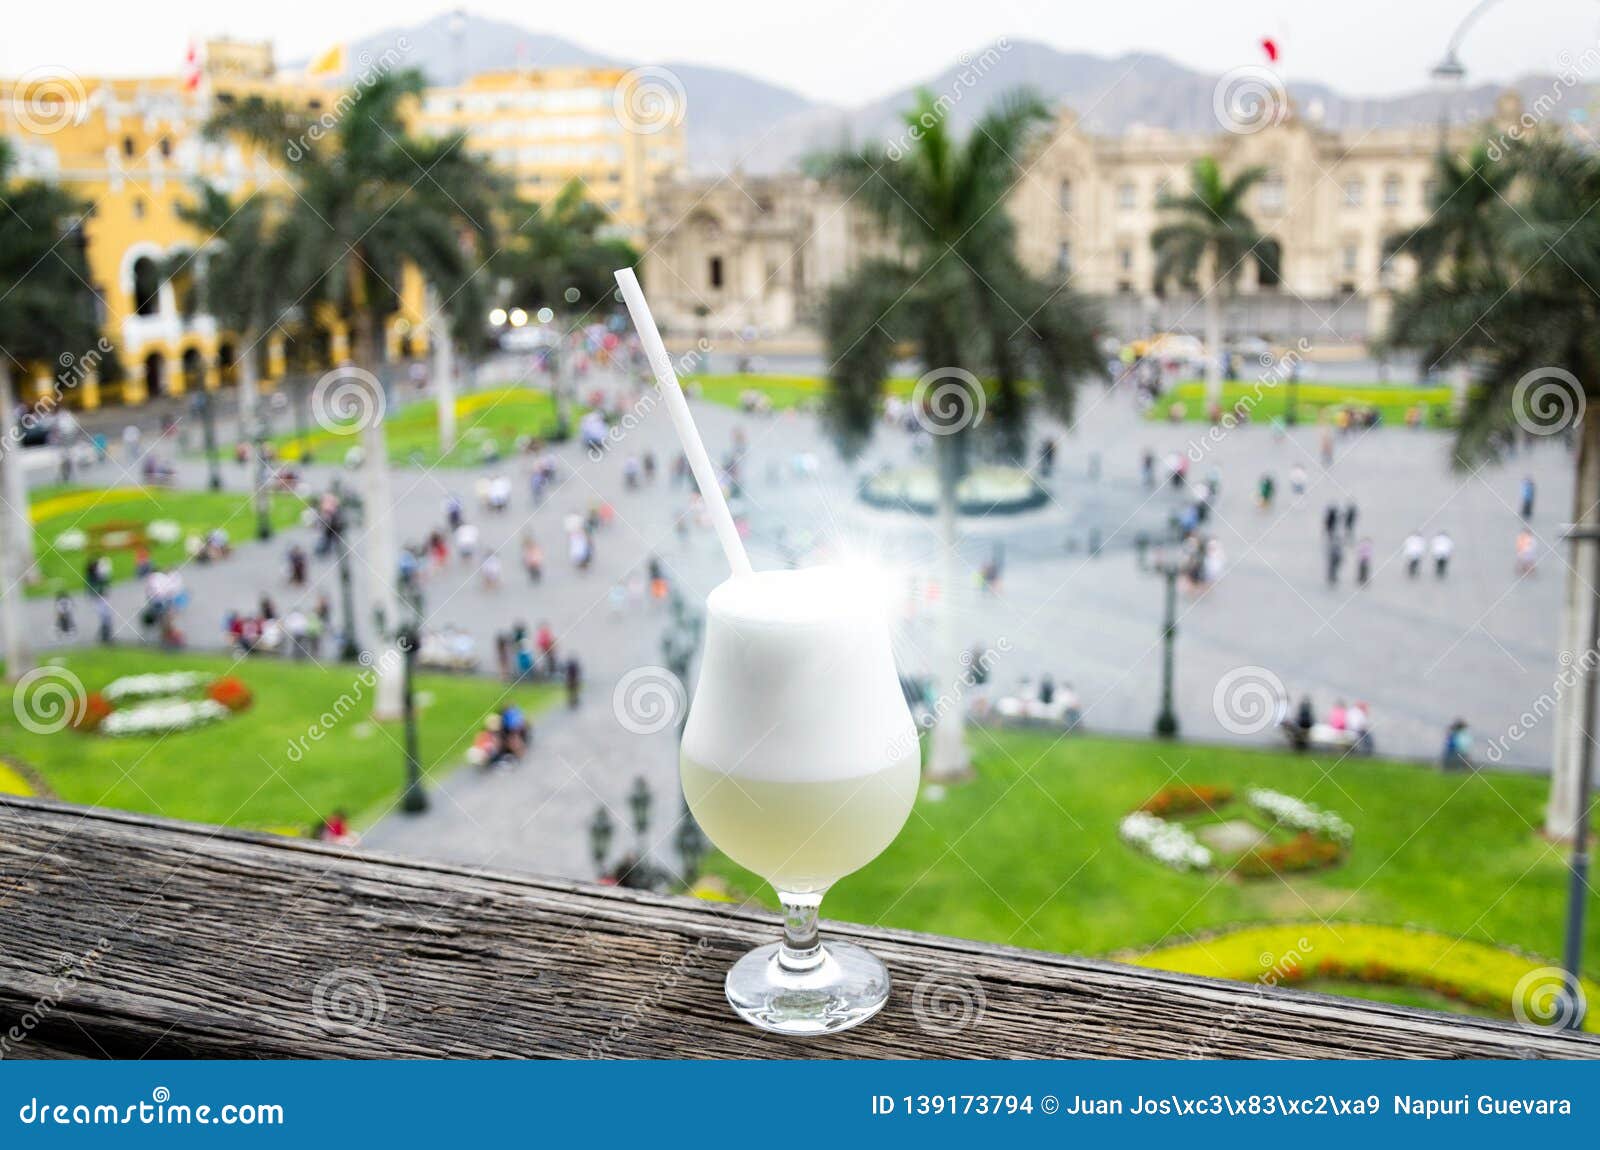 pisco sour homemade cocktail with the background of the main square of lima